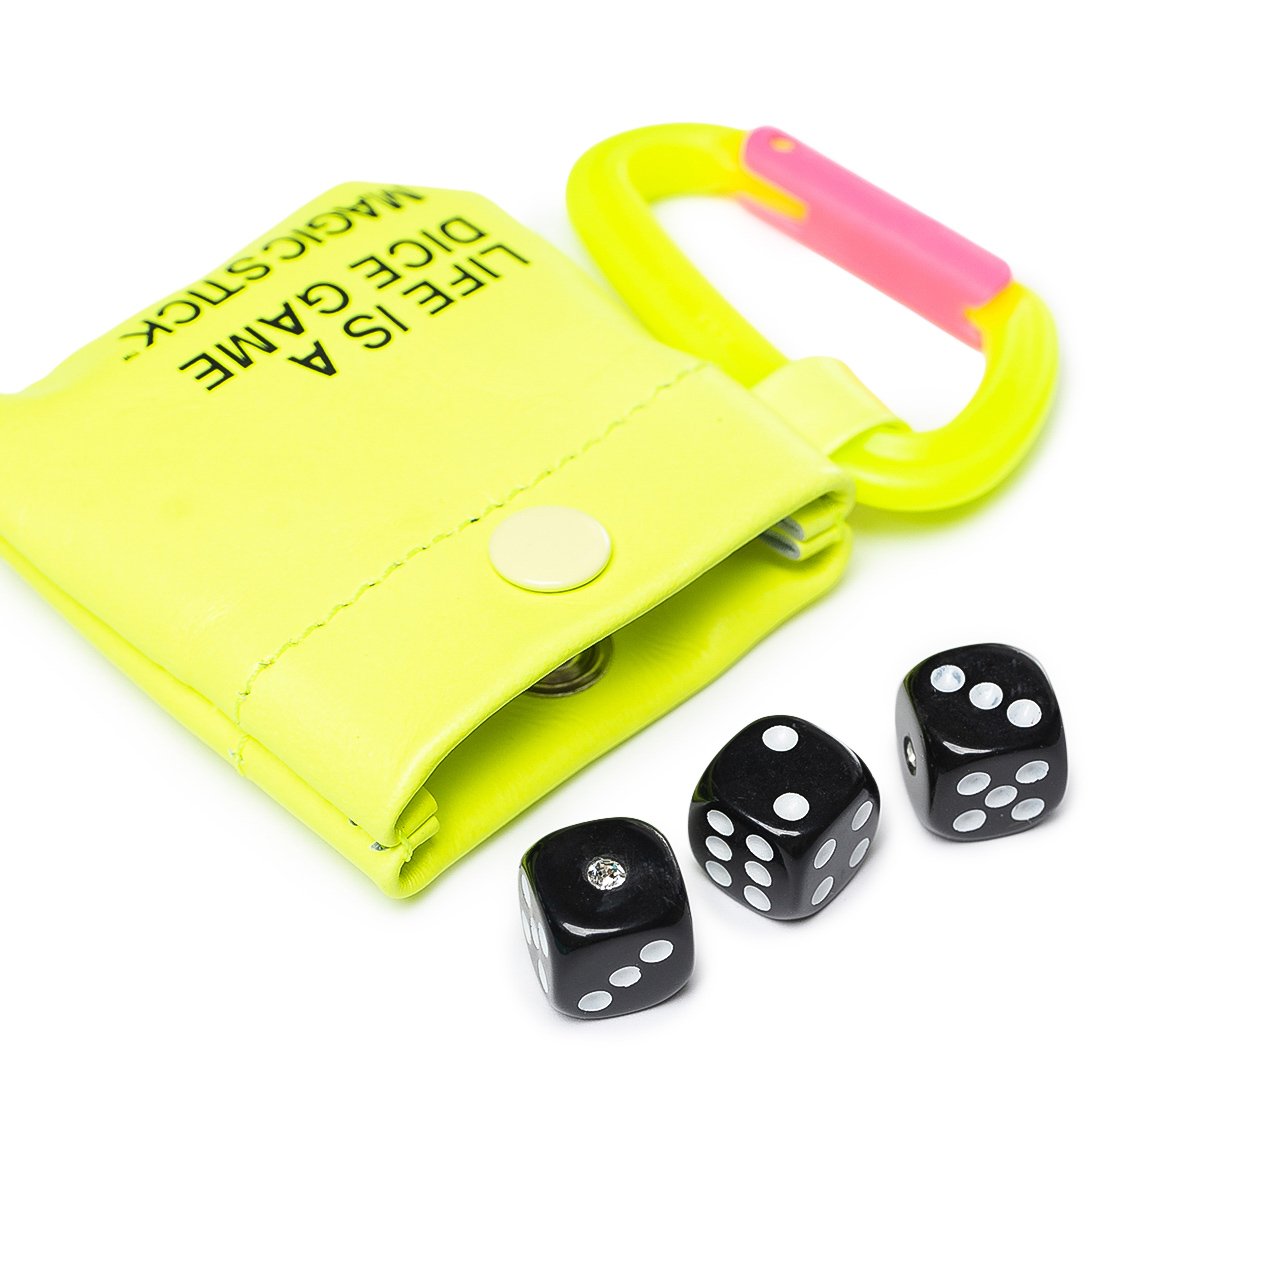 magic stick travel chinkoro pouch with dice (volt yellow) - 19ss-ms7-015 - a.plus - Image - 3